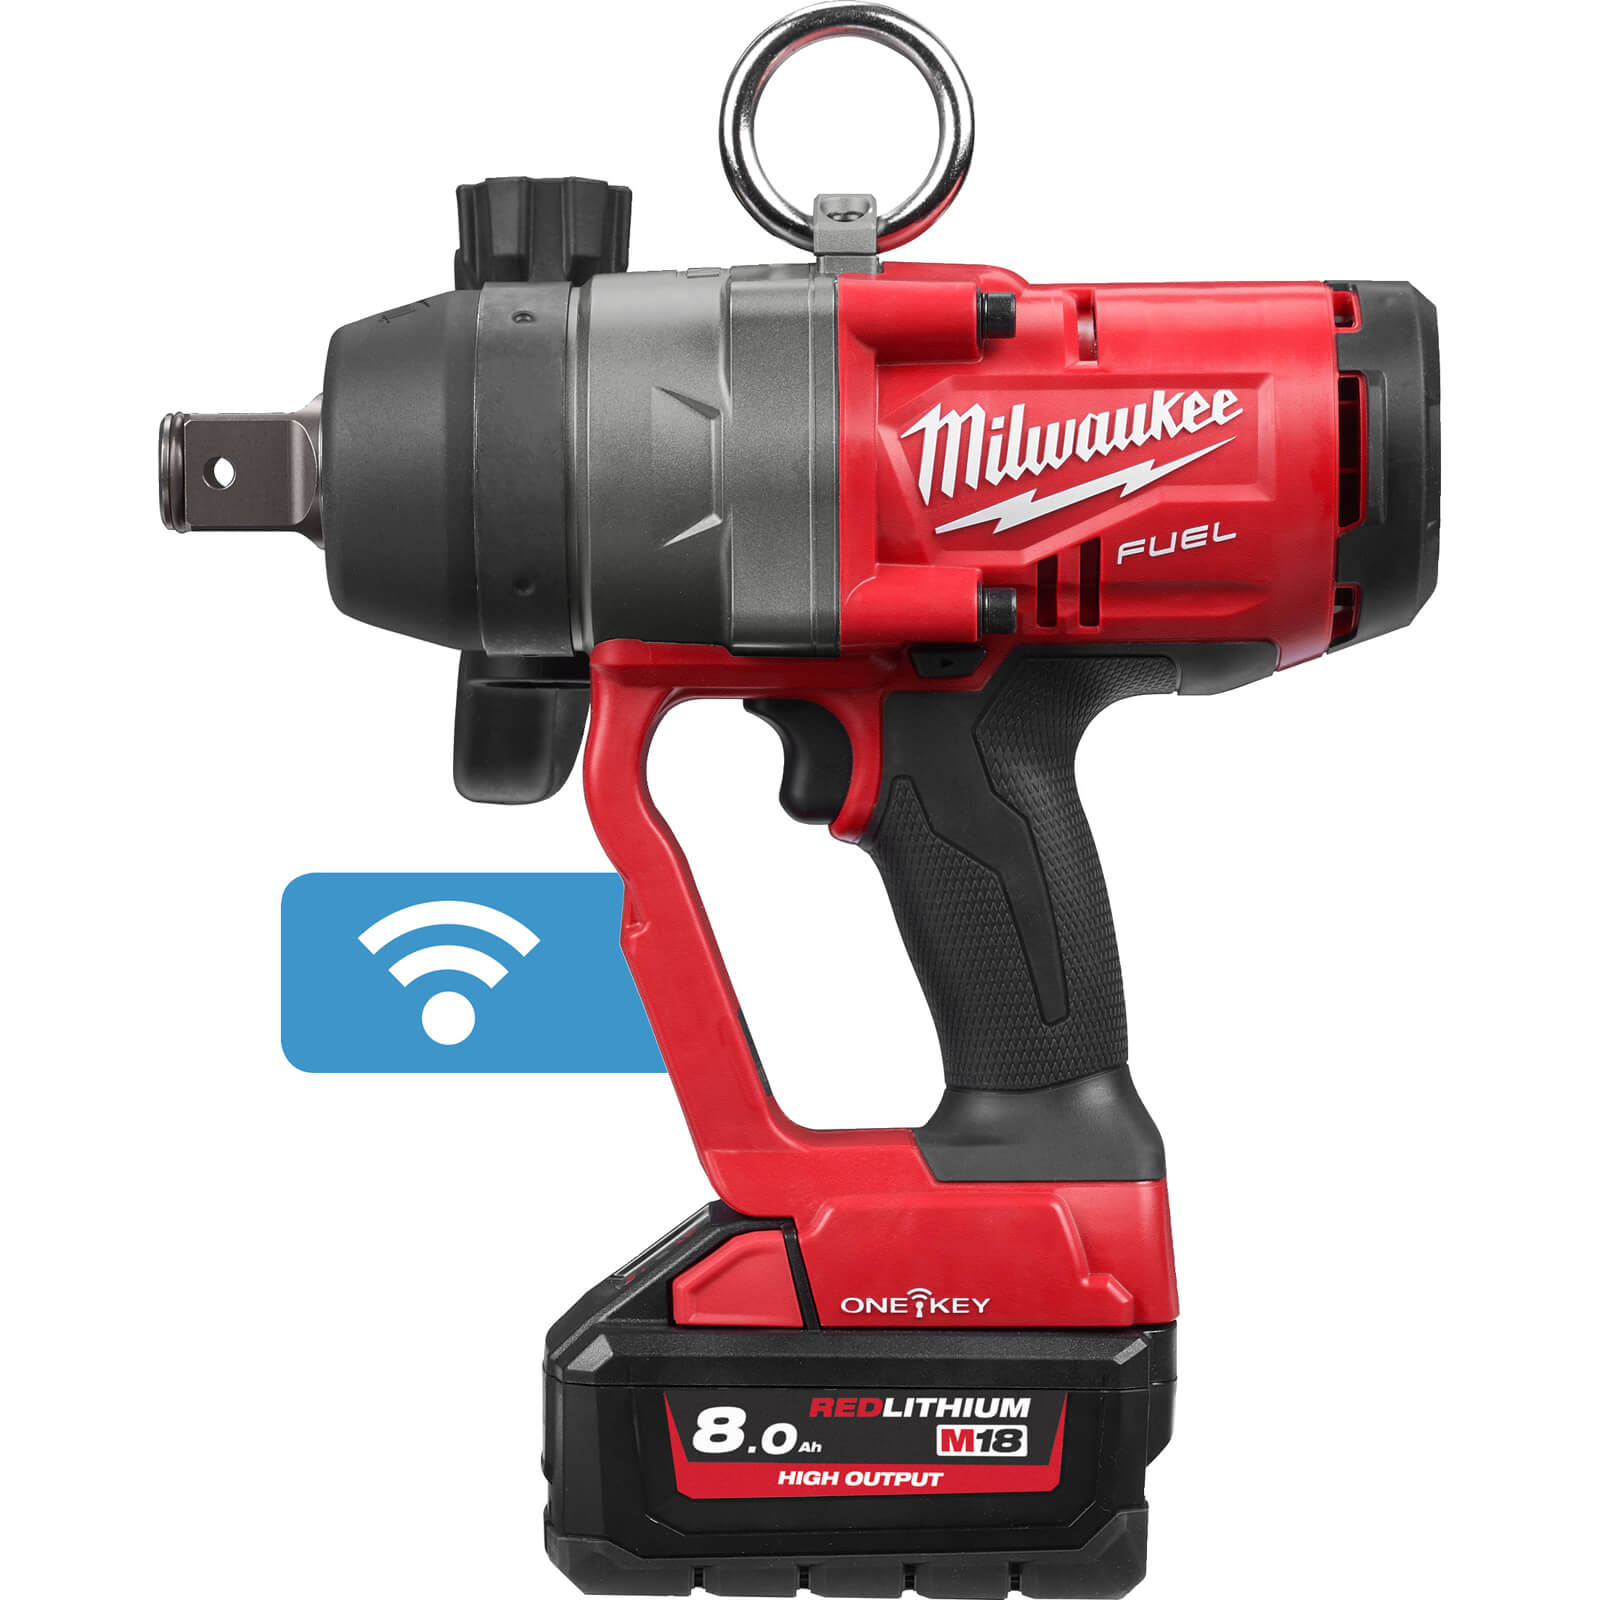 Image of Milwaukee M18 ONEFHIWF1 Fuel 18v Cordless Brushless 1" Drive Impact Wrench 2 x 8ah Li-ion Charger Case